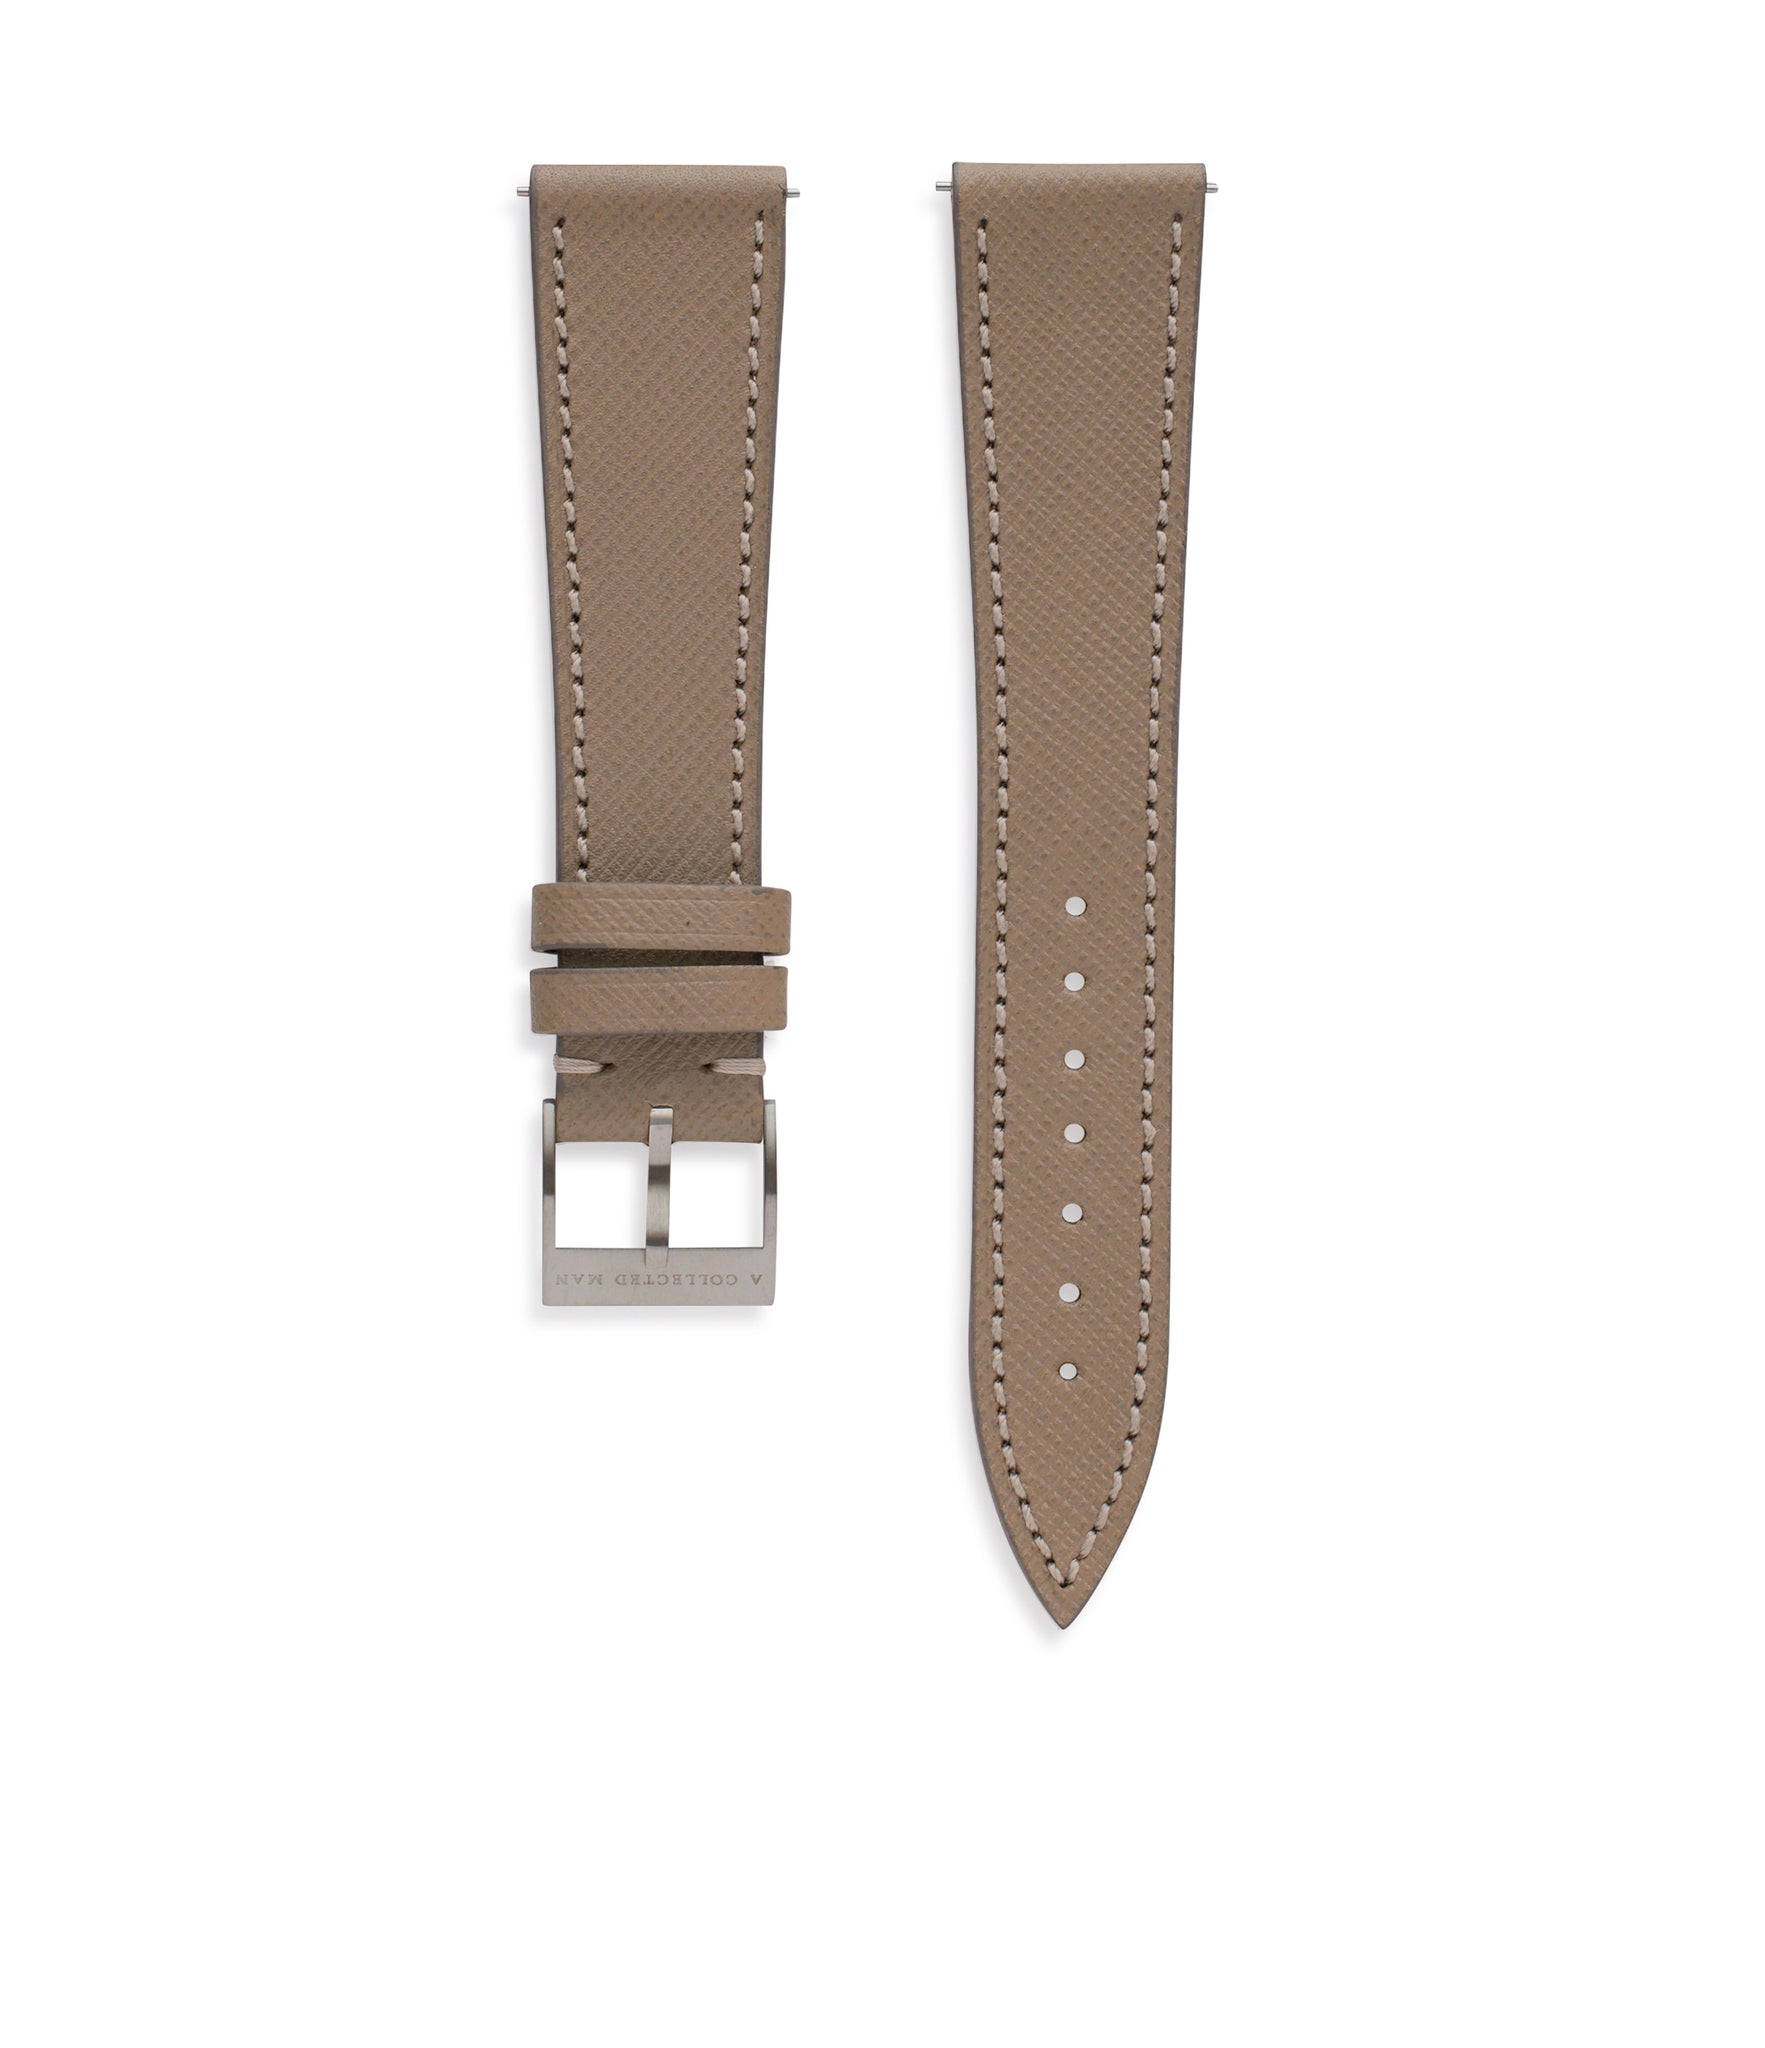 Buy saffiano quality watch strap in driftwood taupe from A Collected Man London, in short or regular lengths. We are proud to offer these hand-crafted watch straps, thoughtfully made in Europe, to suit your watch. Available to order online for worldwide delivery.